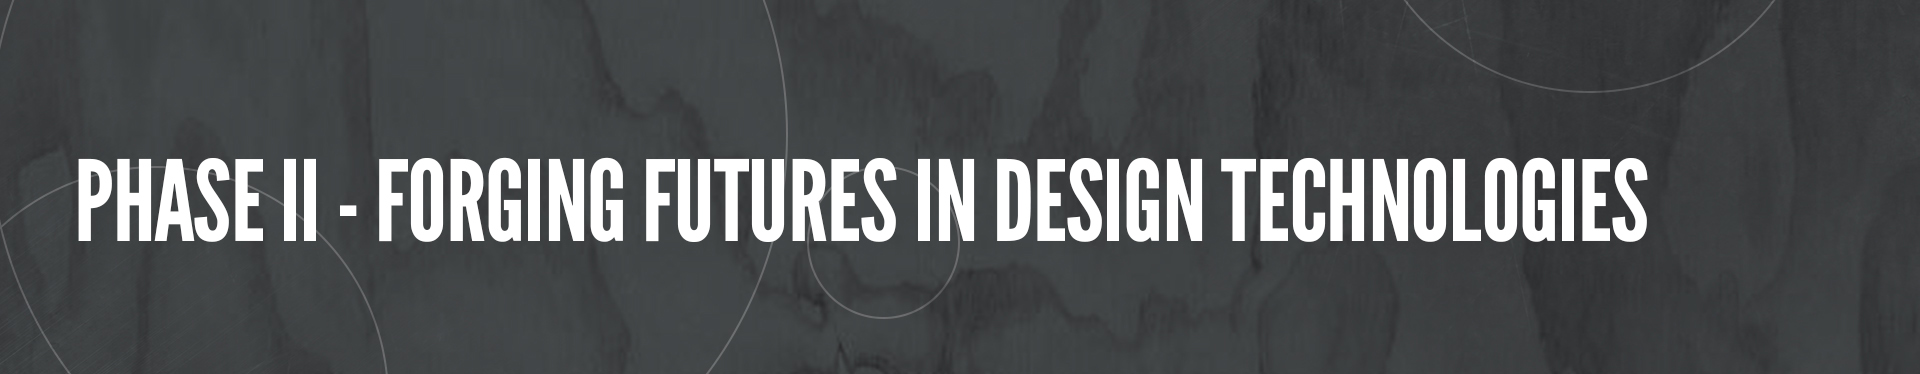 PHASE II - FORGING FUTURES IN DESIGN TECHNOLOGIES